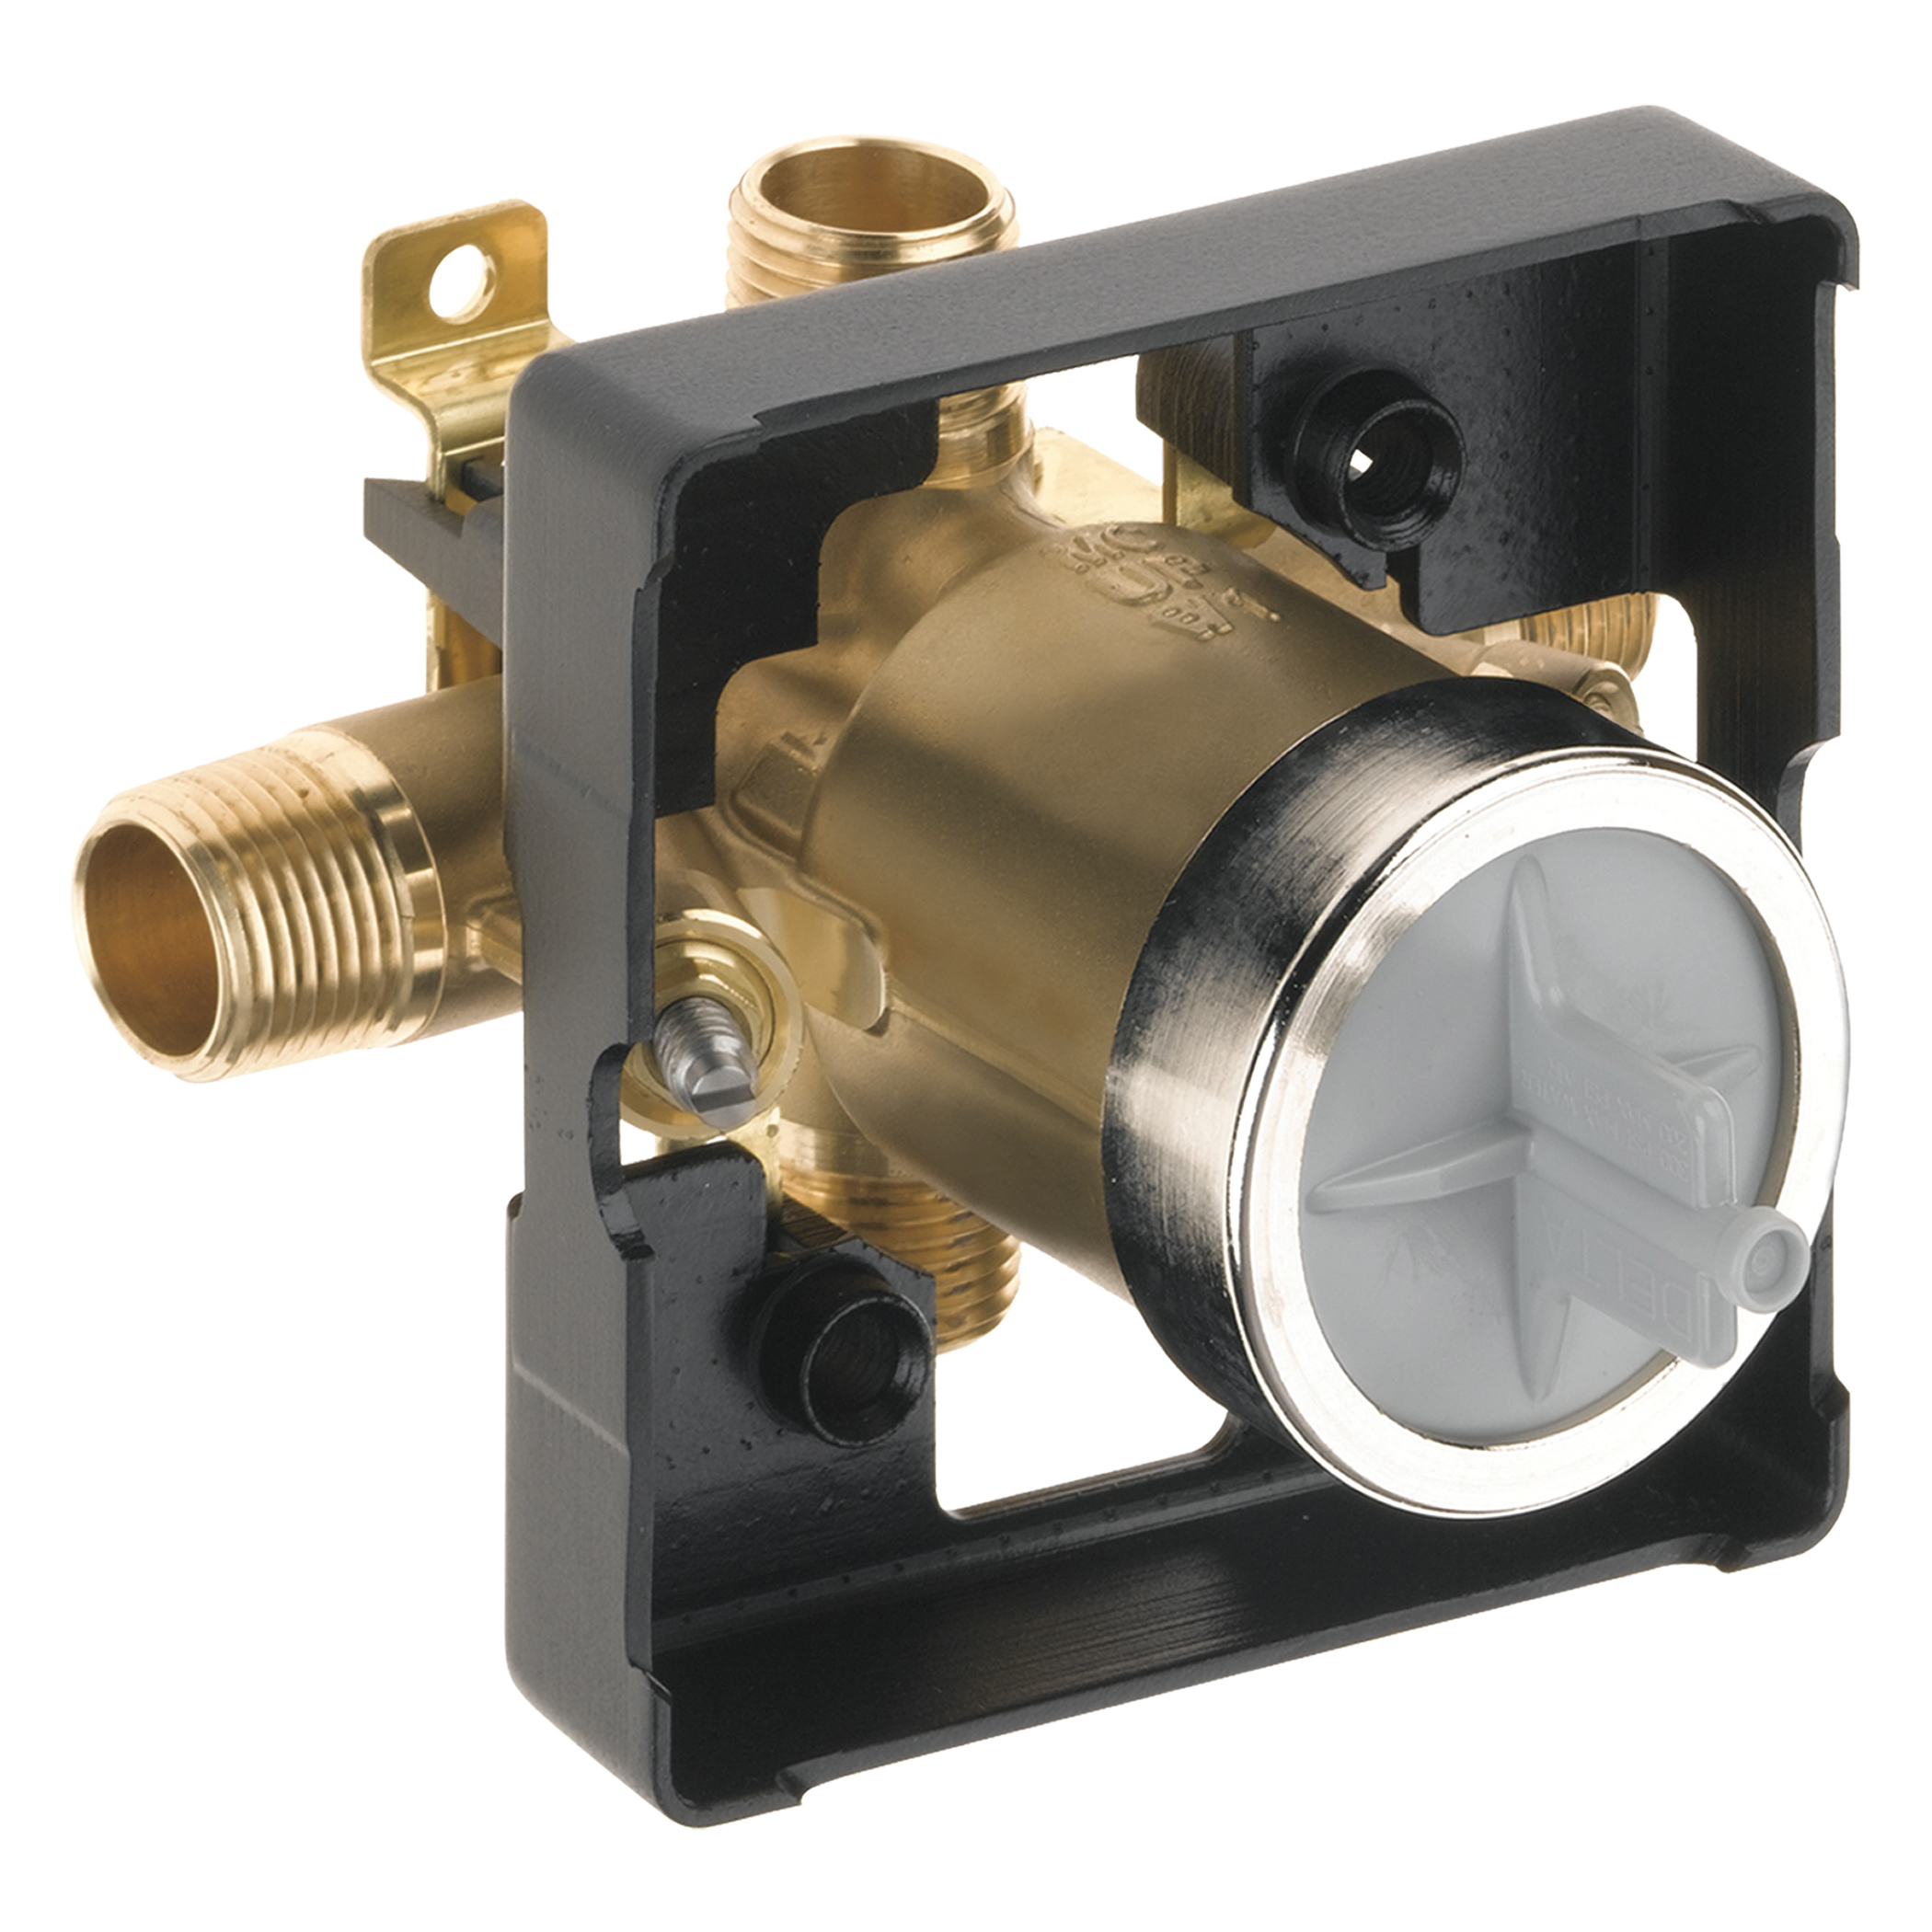 DELTA® R10000-UNWS Universal Tub and Shower Rough-In Valve Body, Forged Brass Body, Domestic